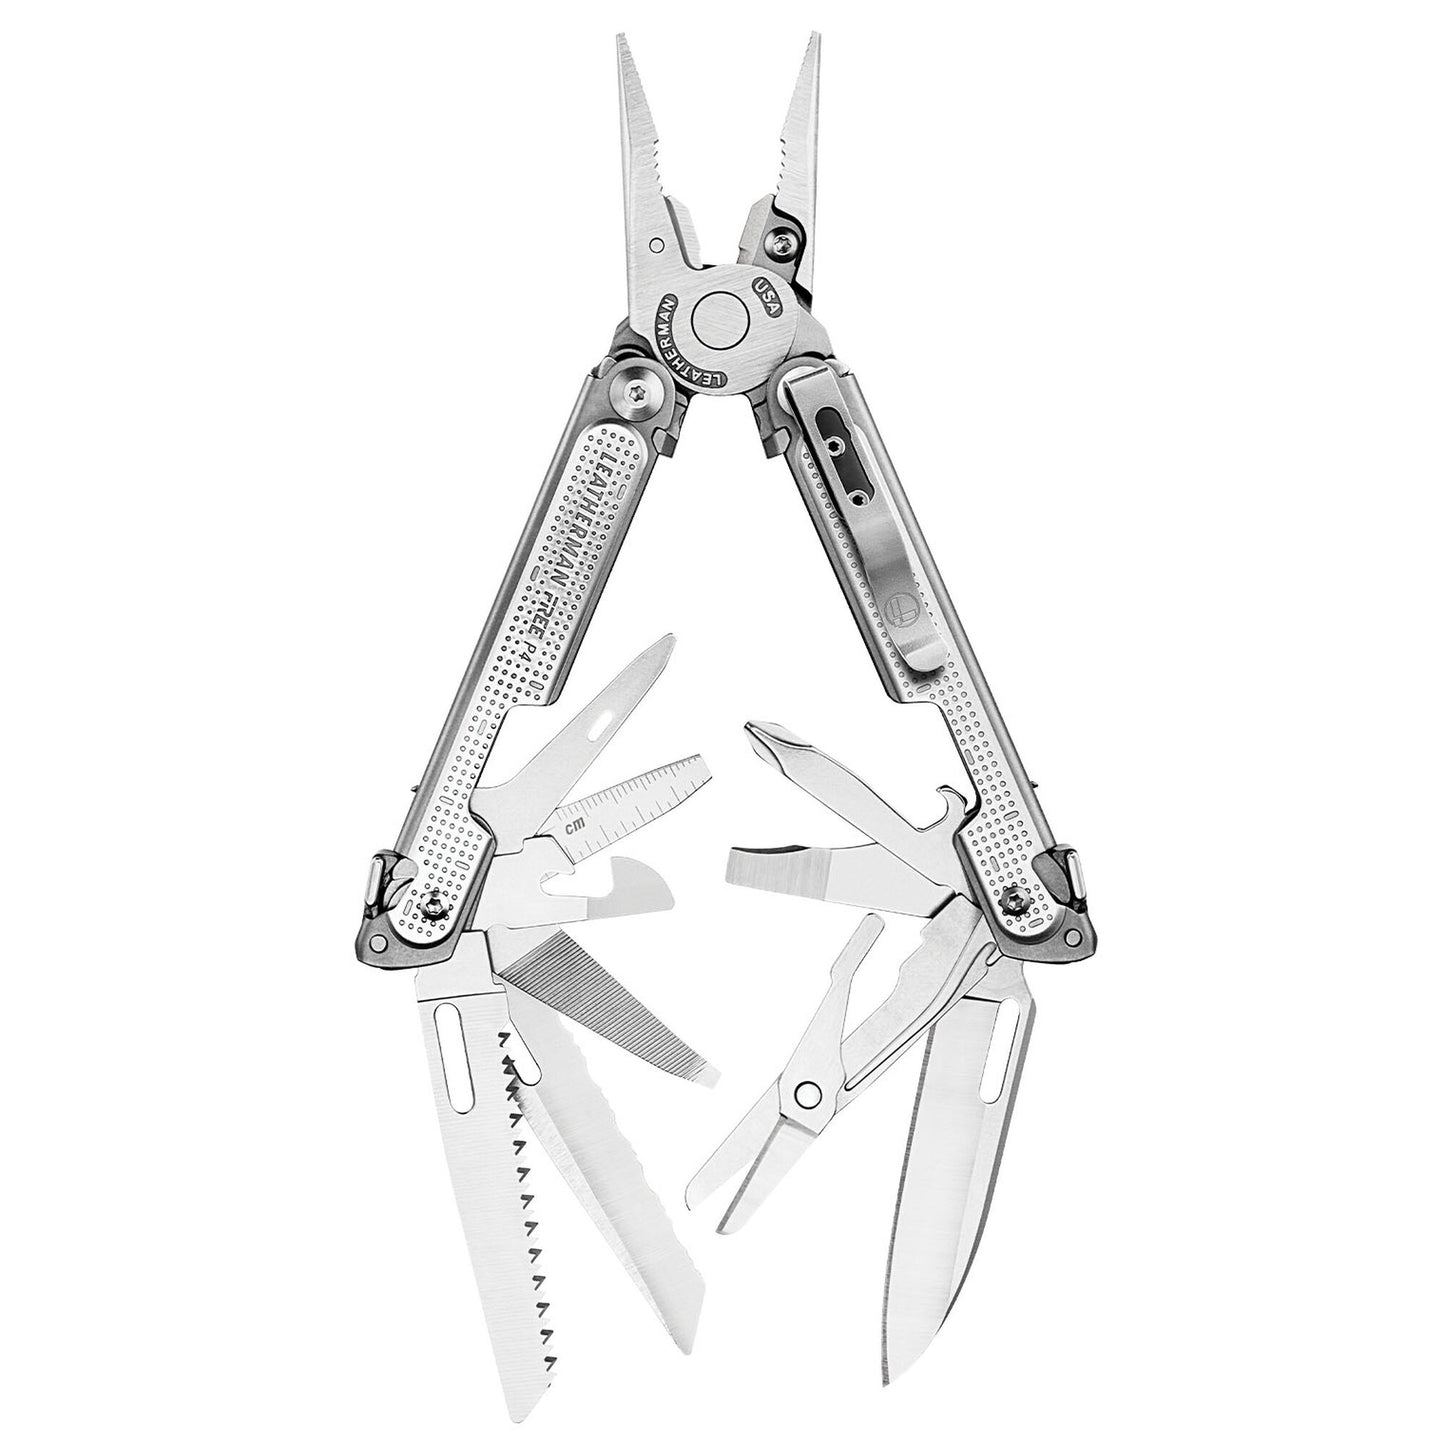 Leatherman Free p4 (Included free Engraving)